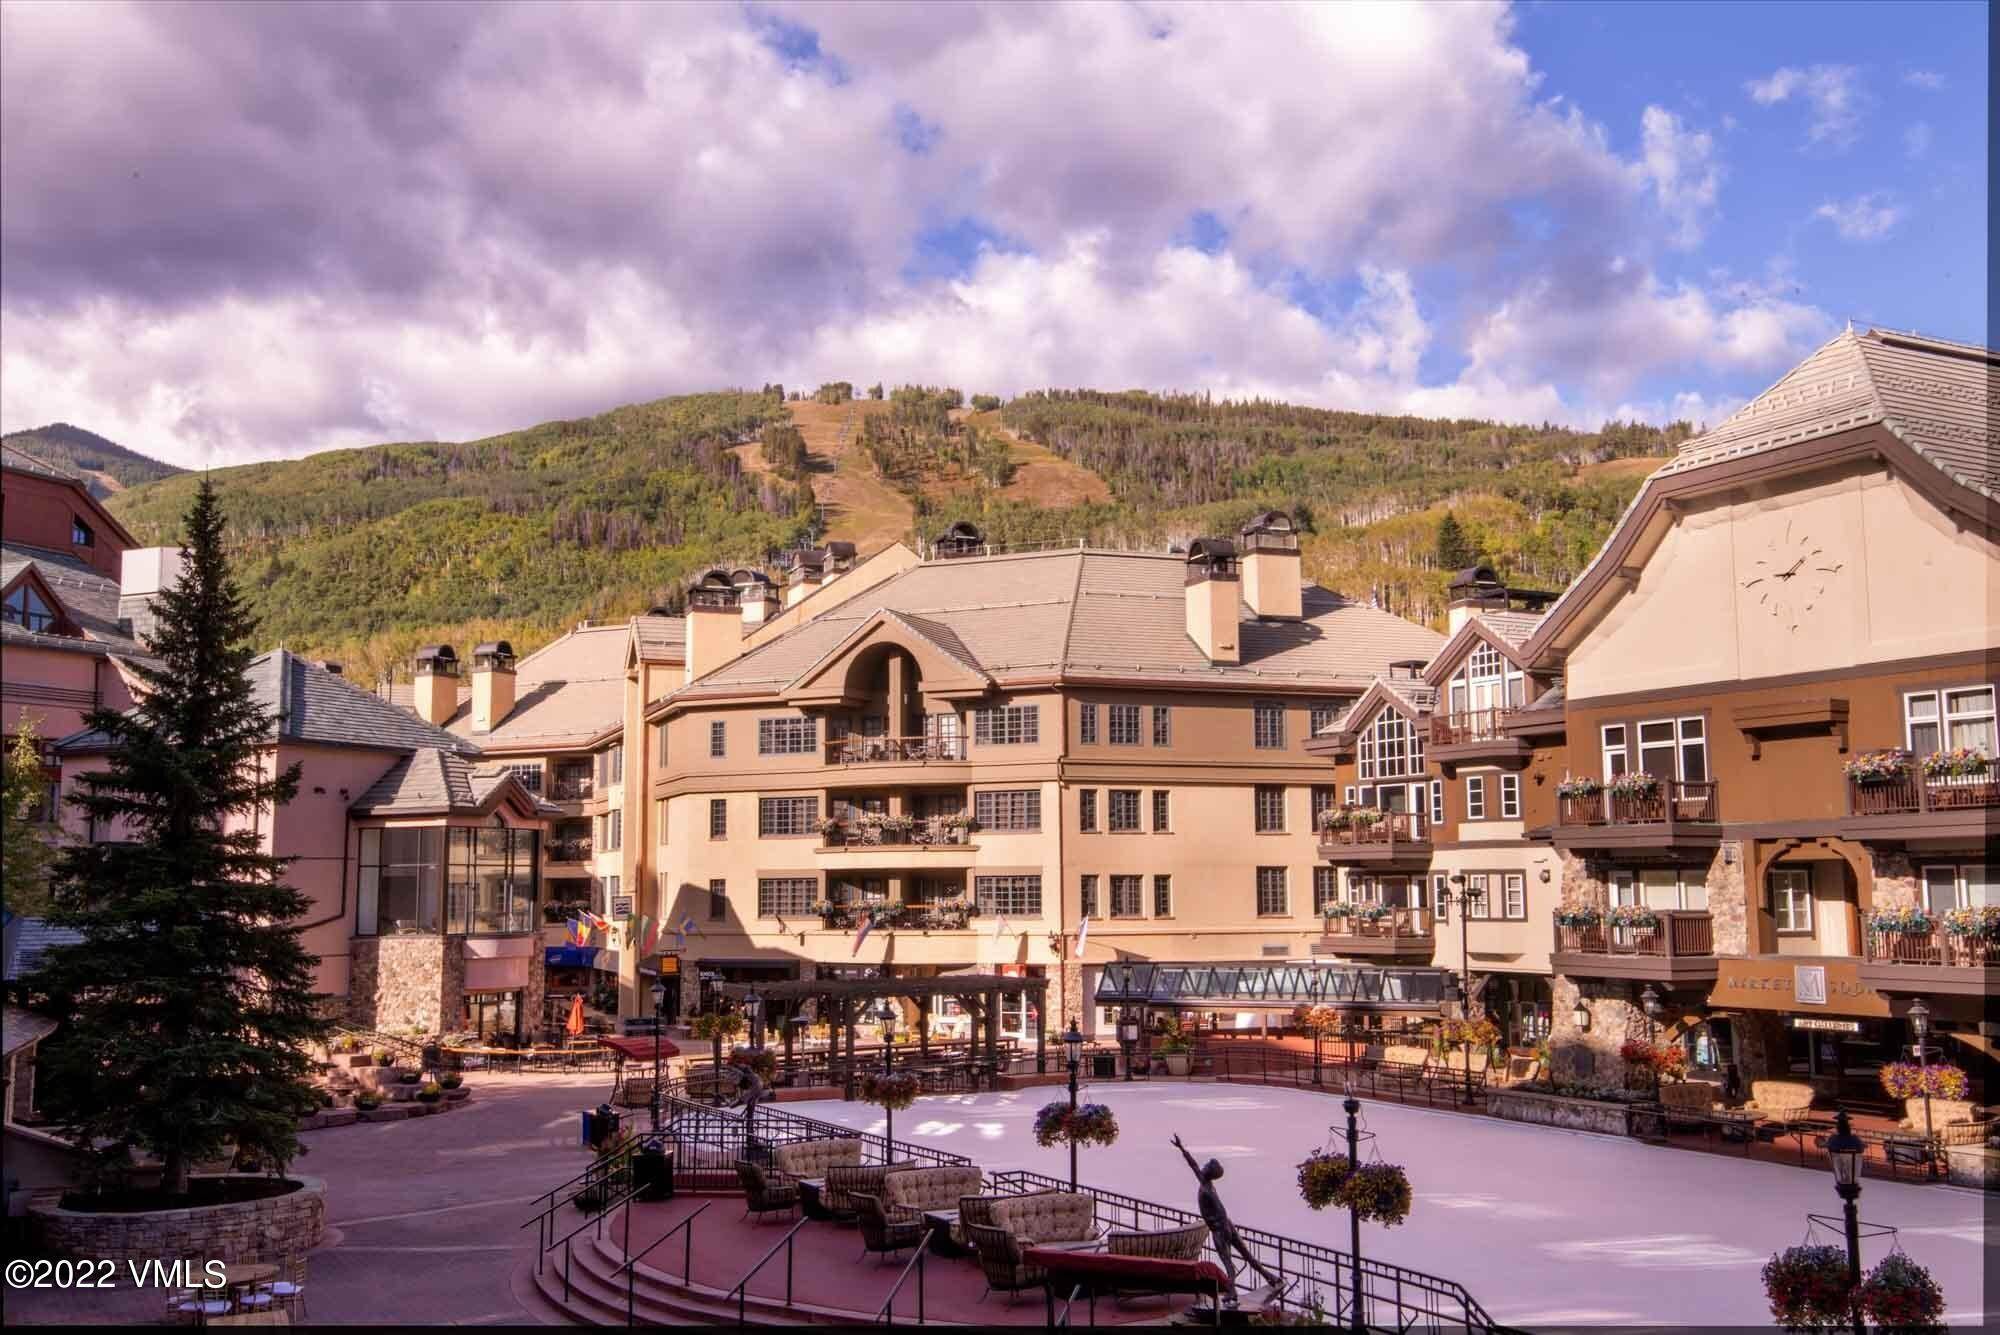 Fractional Ownership Property for Active at 46 Avondale Beaver Creek, Colorado 81620 United States